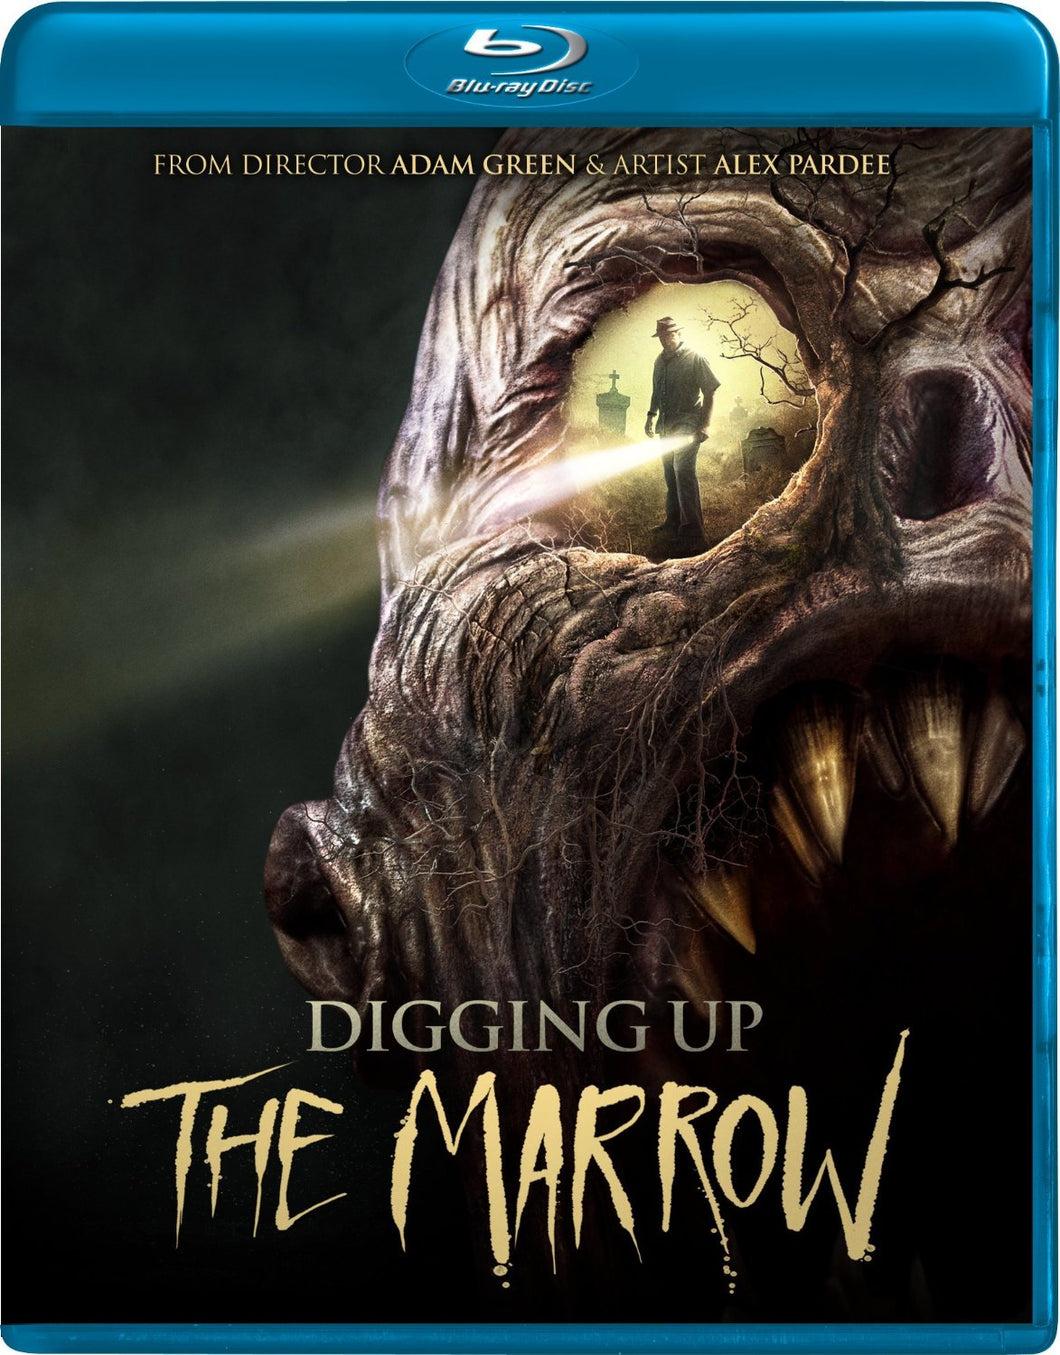 DIGGING UP THE MARROW - Autographed Blu-Ray